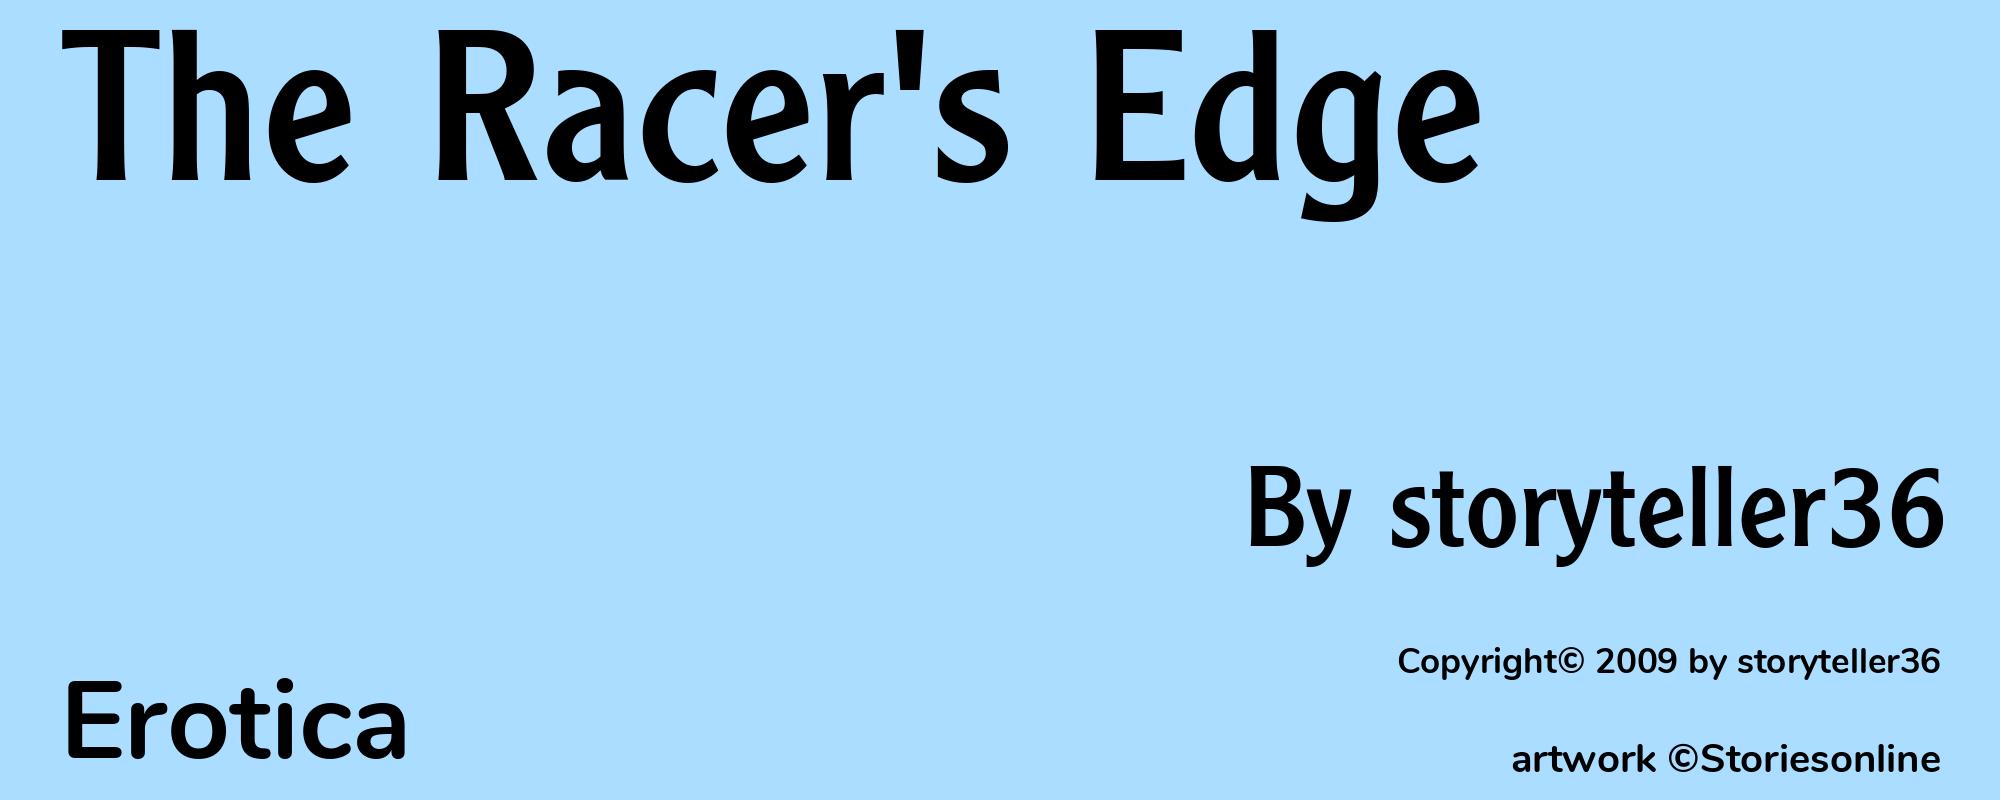 The Racer's Edge - Cover